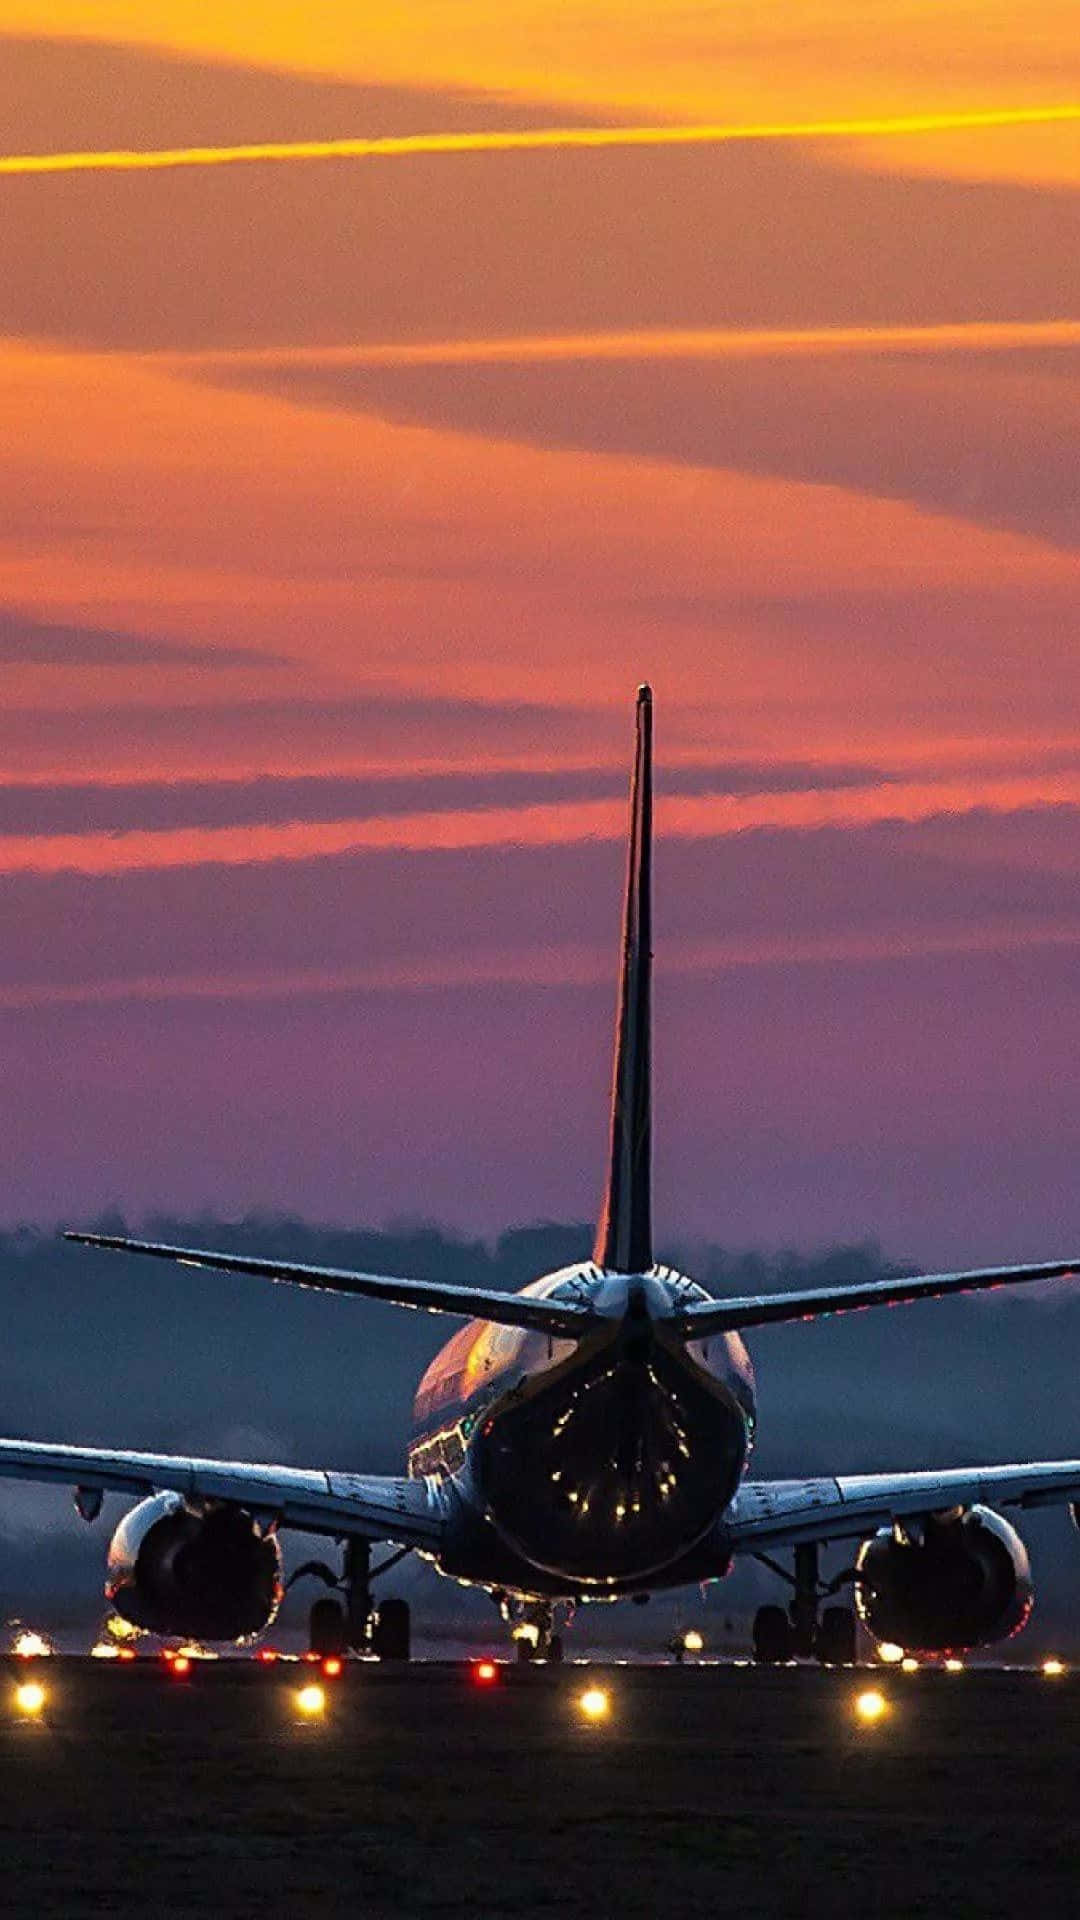 Flying into the sunset.